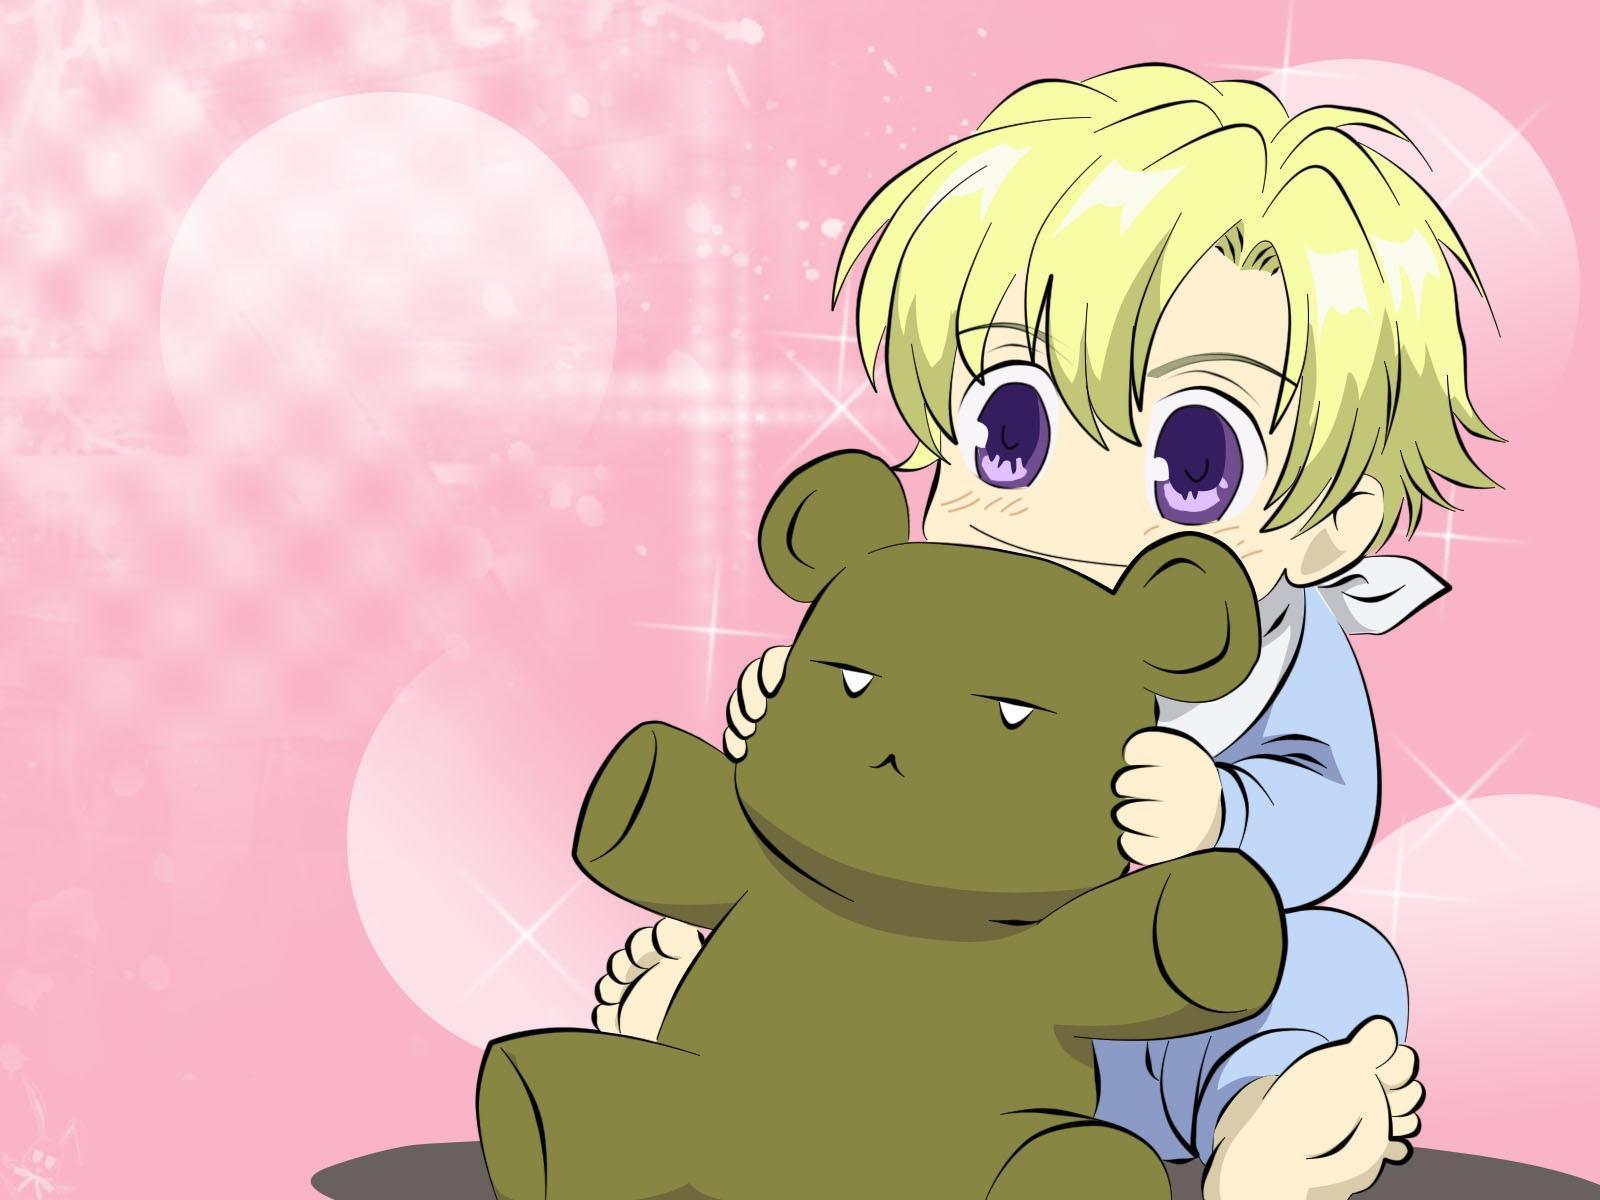 HD desktop wallpaper of a character from Ouran High School Host Club holding a teddy bear, with a pink background.